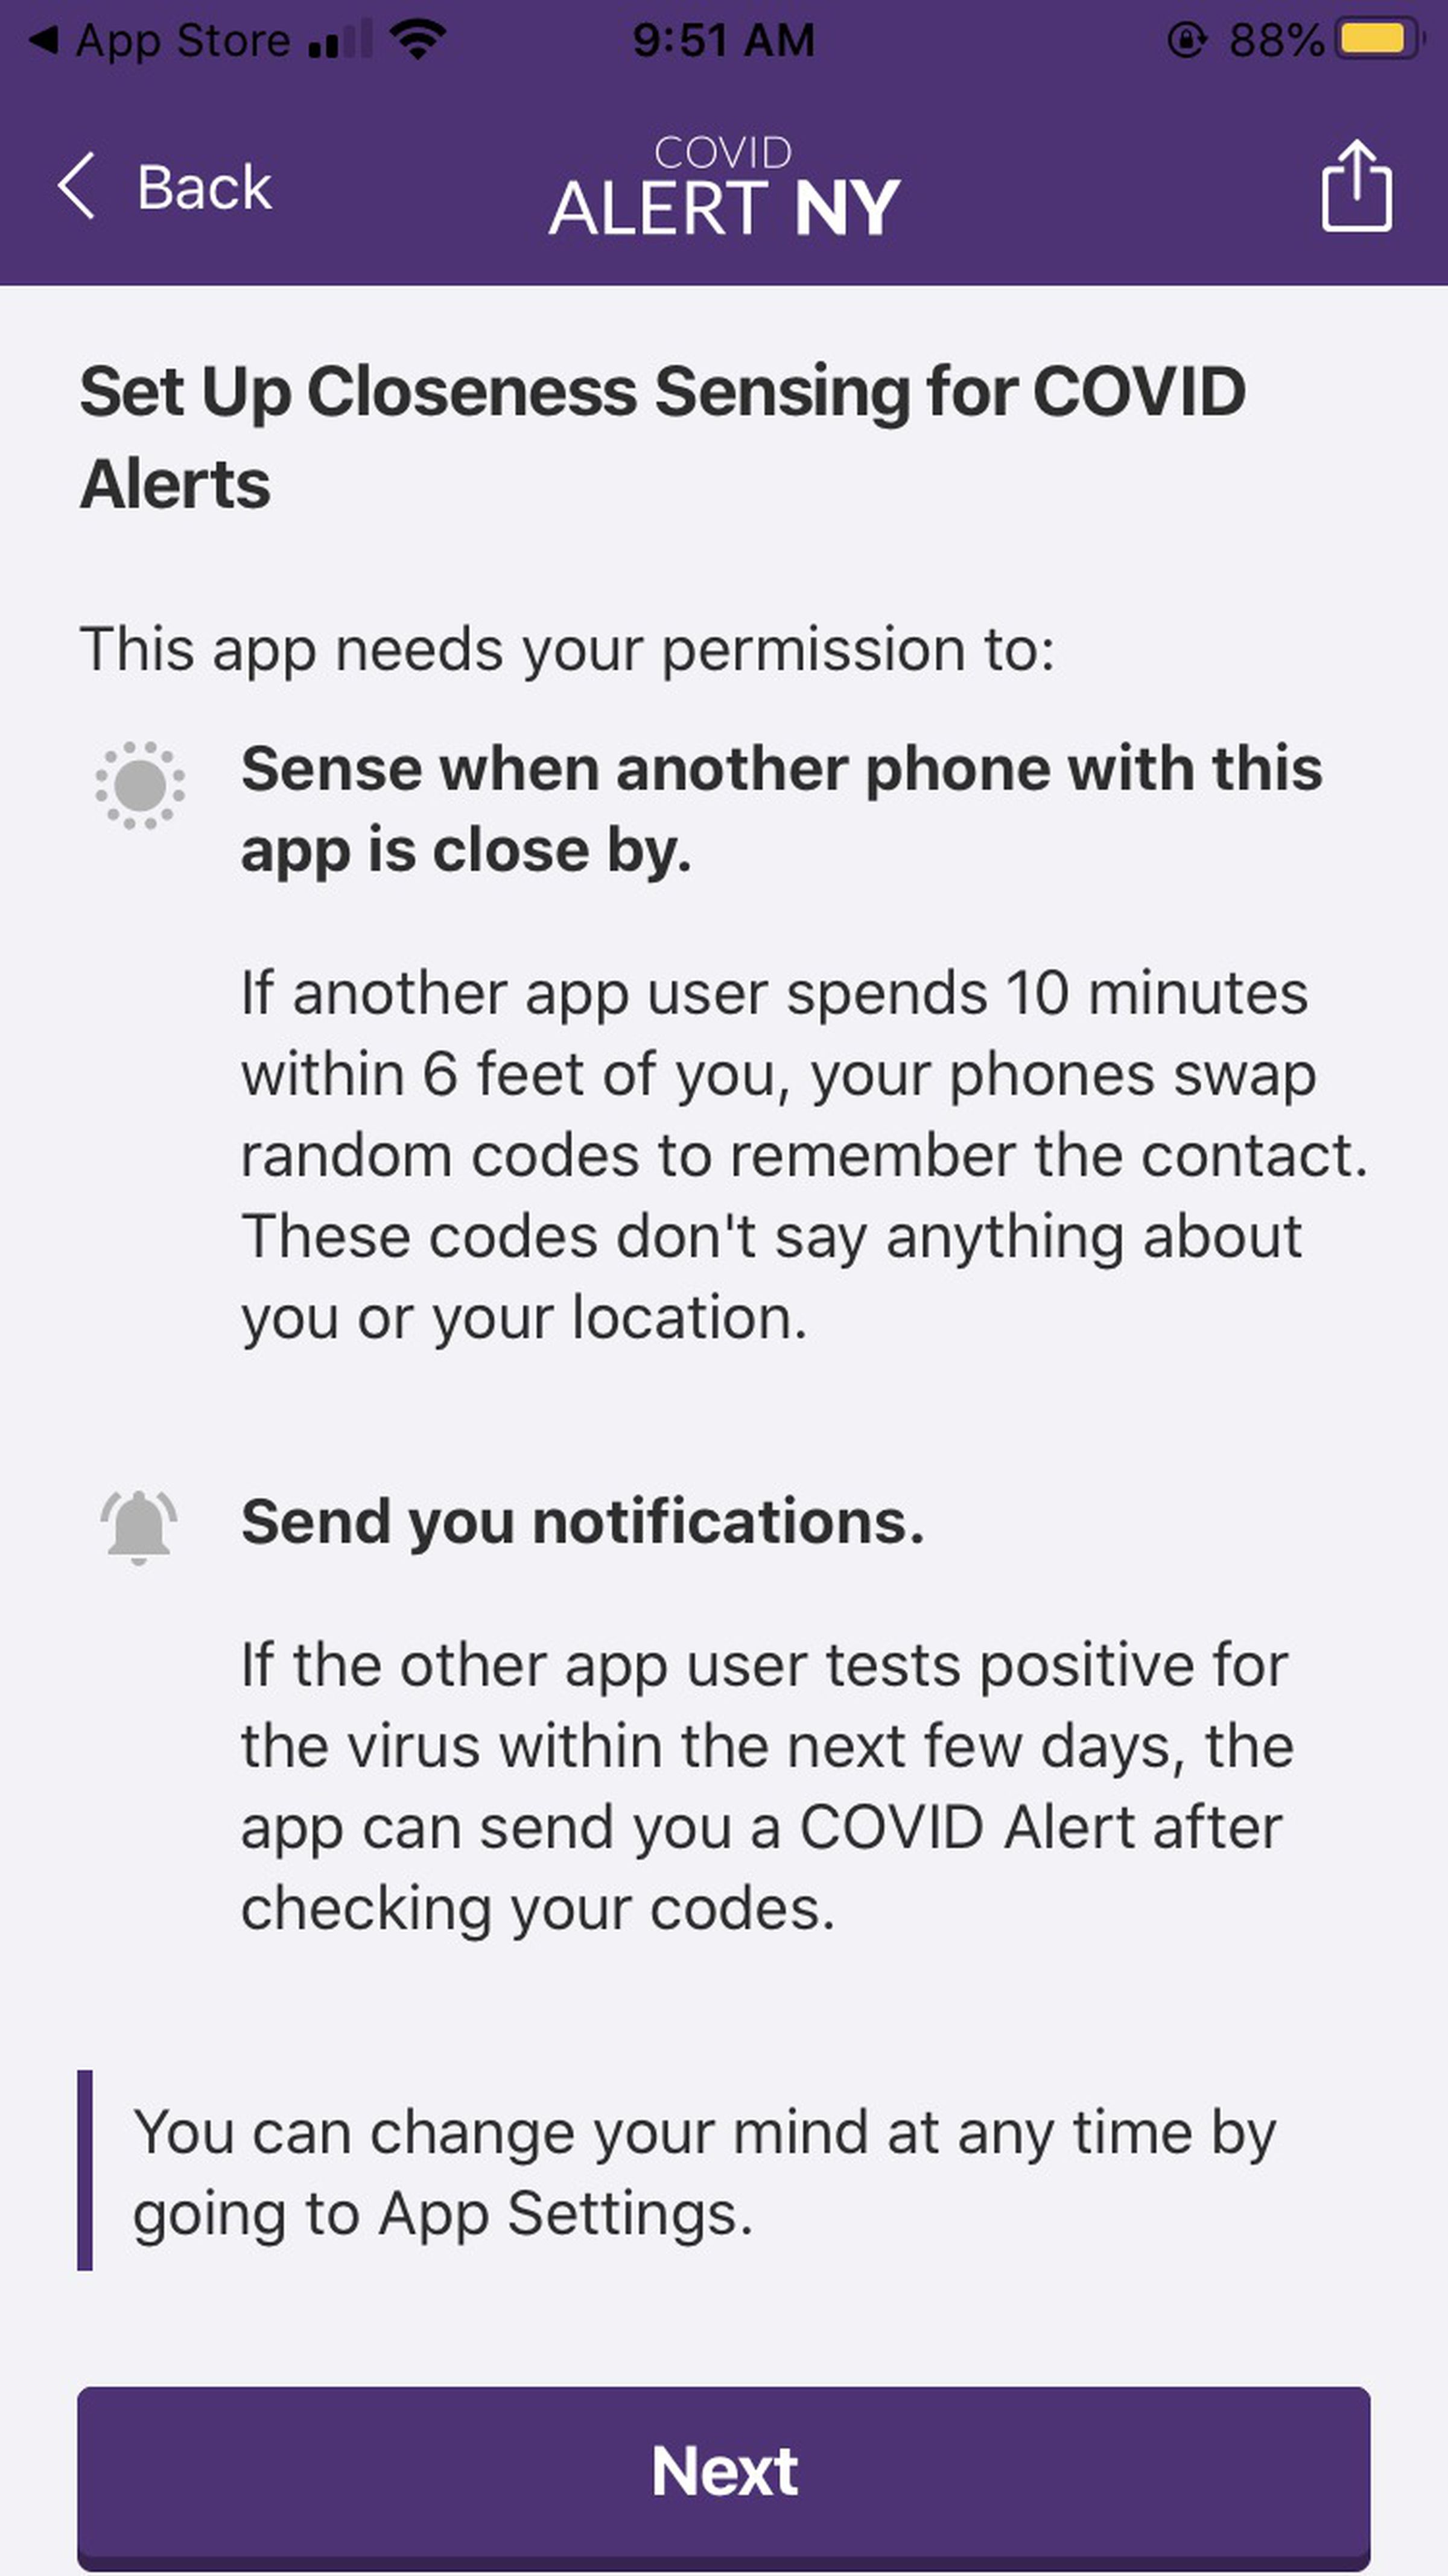 The app explains why it’s asking for certain permissions from your phone.